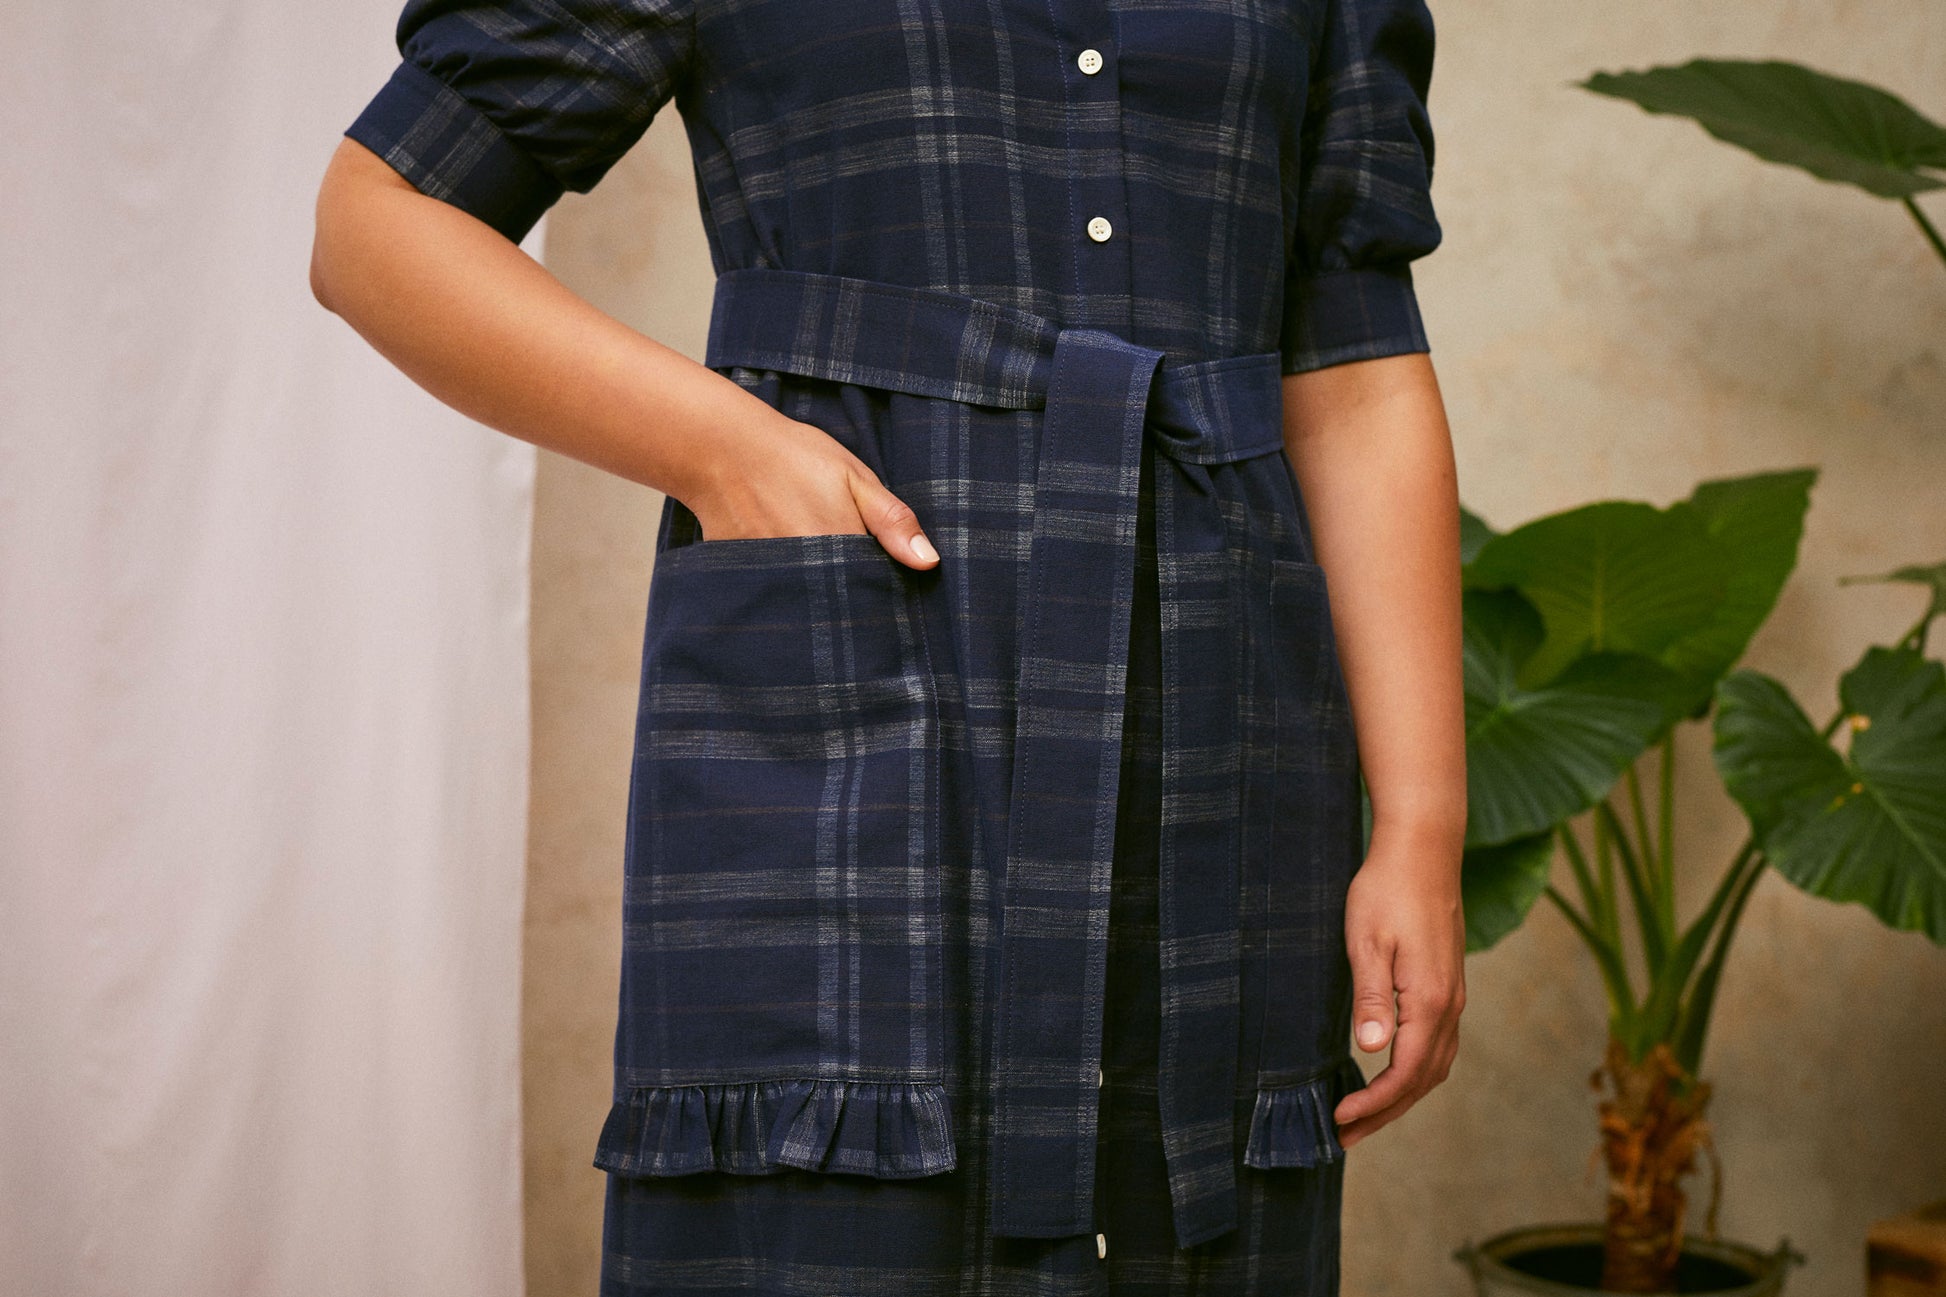 Close up of Saywood's Rosa navy check shirtdress, with the belt tied at the waist. Model has one hand in the patch pocket, wthe other hangs to her side. Ruffles at the base of the pockets can be seen. A plant and drop of pink fabric can be seen in the background.